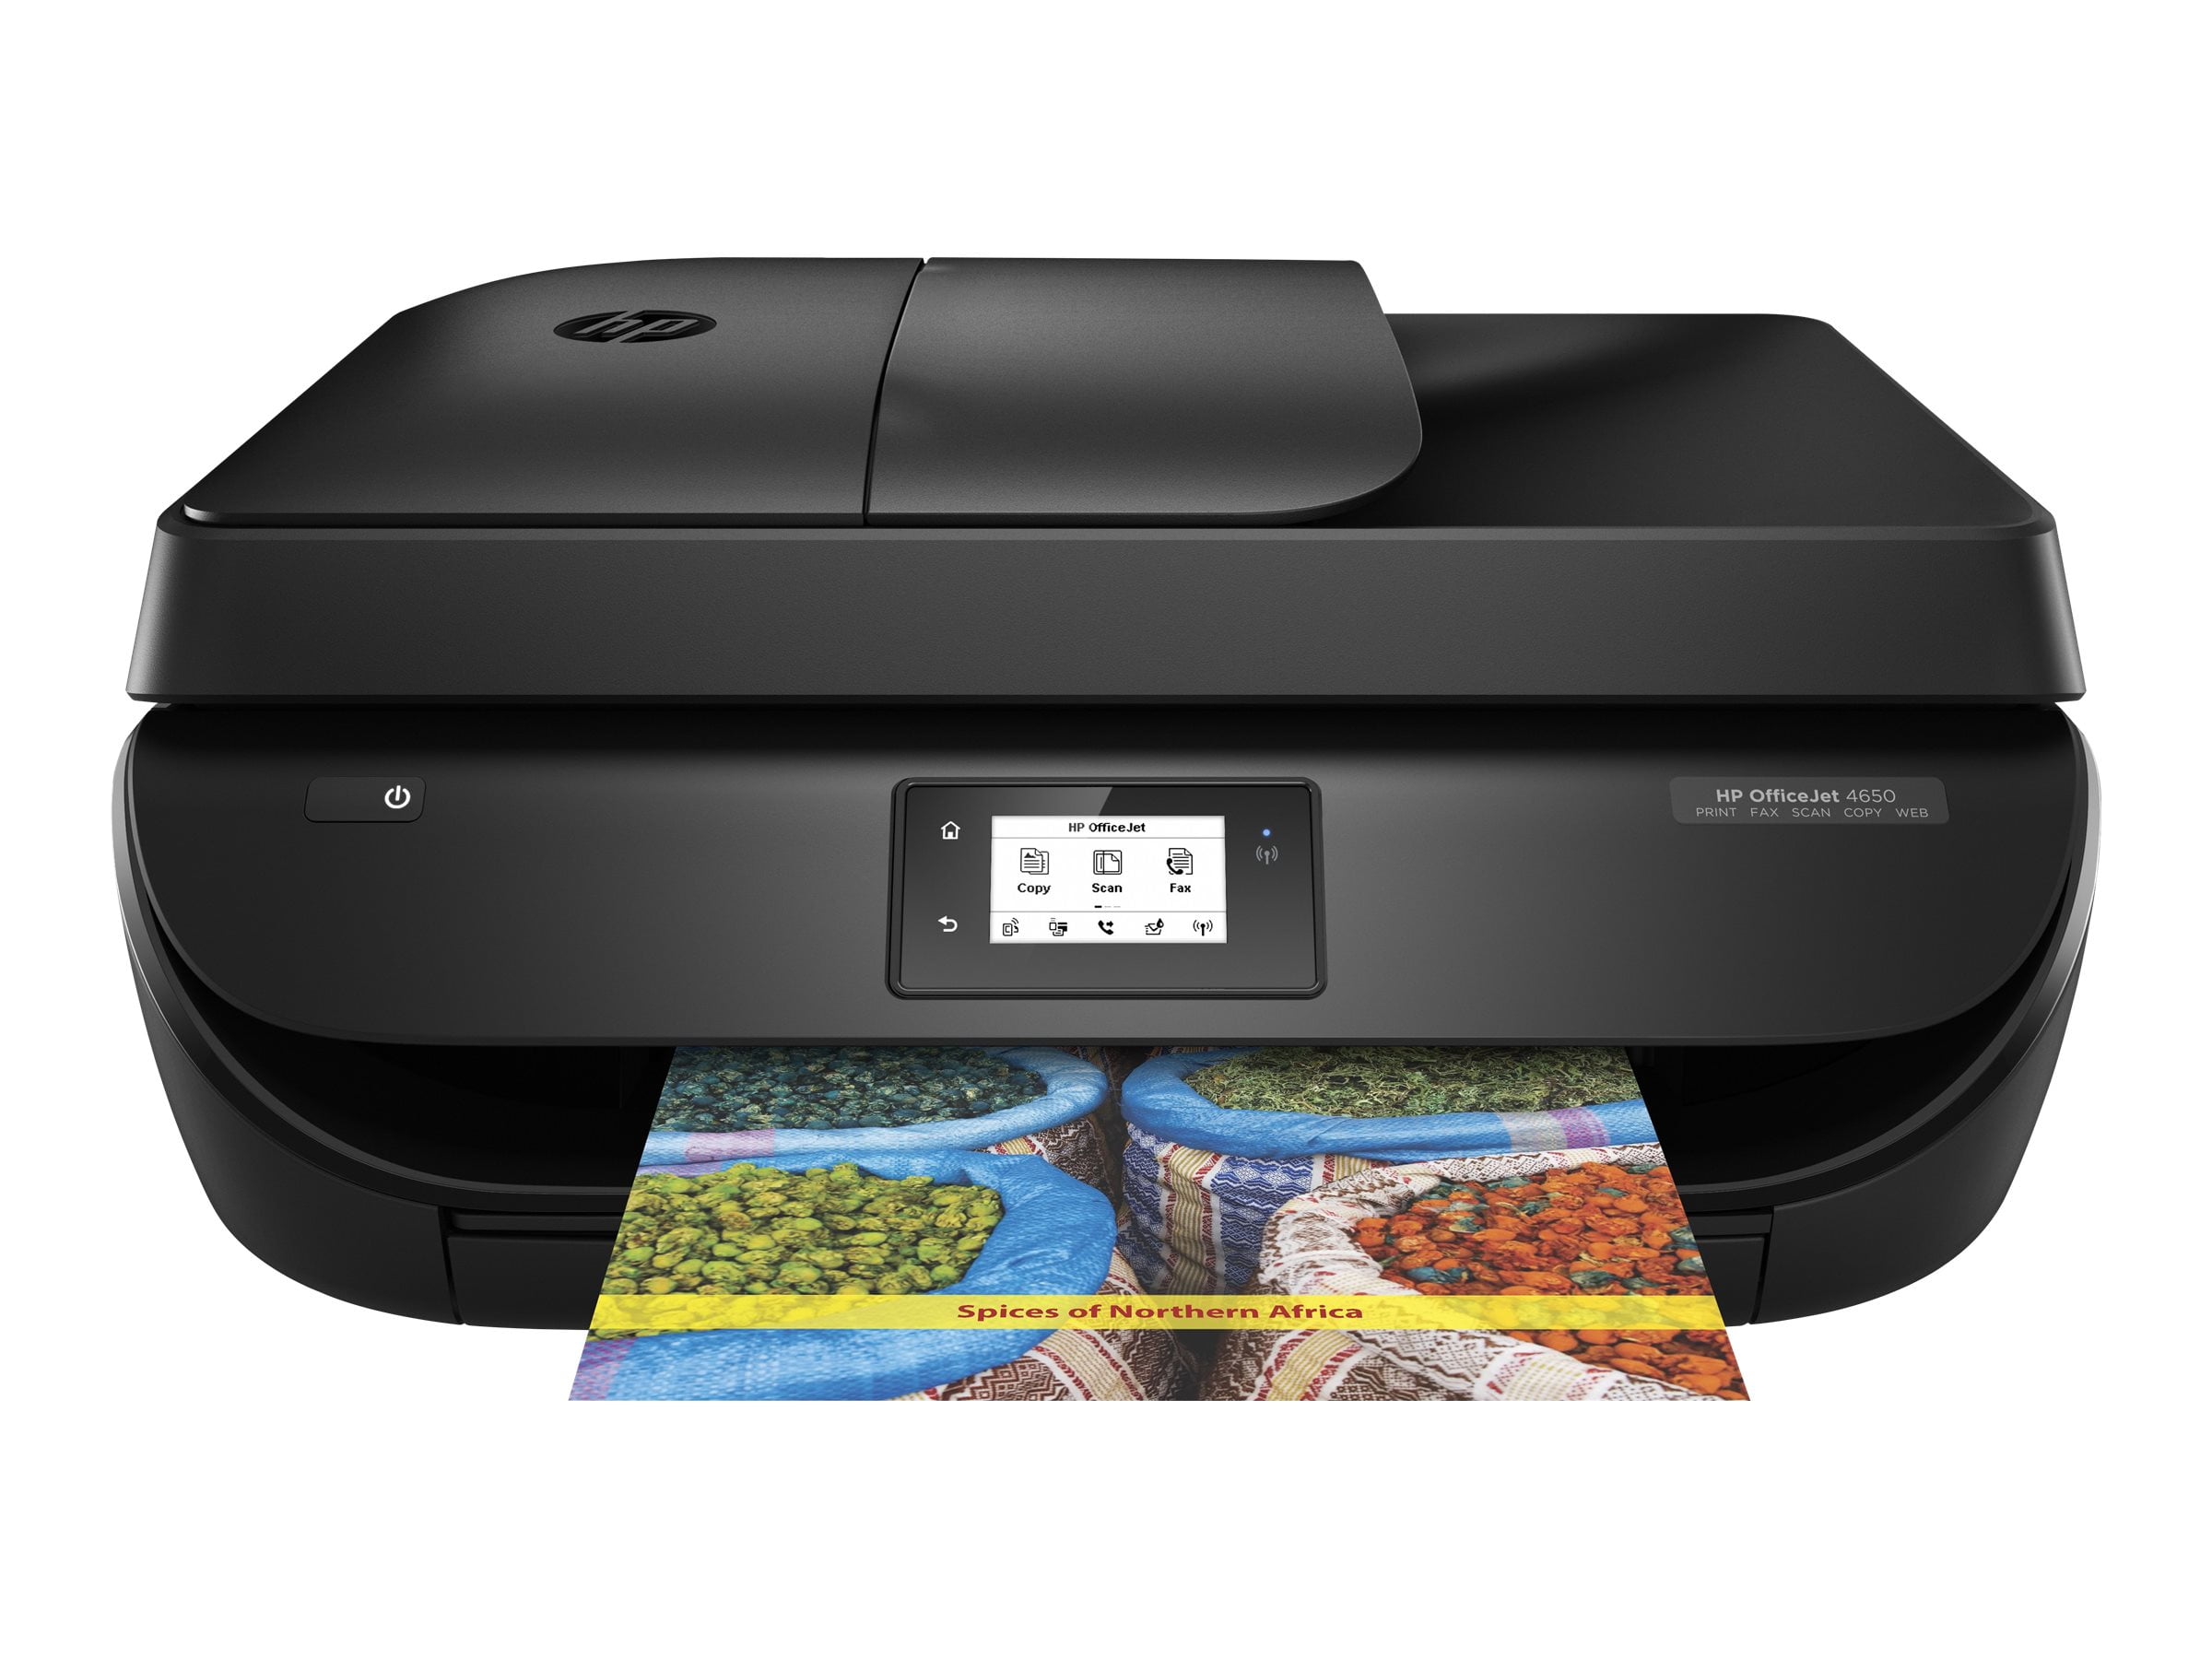 HP Officejet 4655 All-in-One Multifunction printer - color - ink-jet - 8.5 in x 11.7 in (original) - A4/Legal (media) - up to 7.5 ppm (copying) - up to 9.5 ppm (